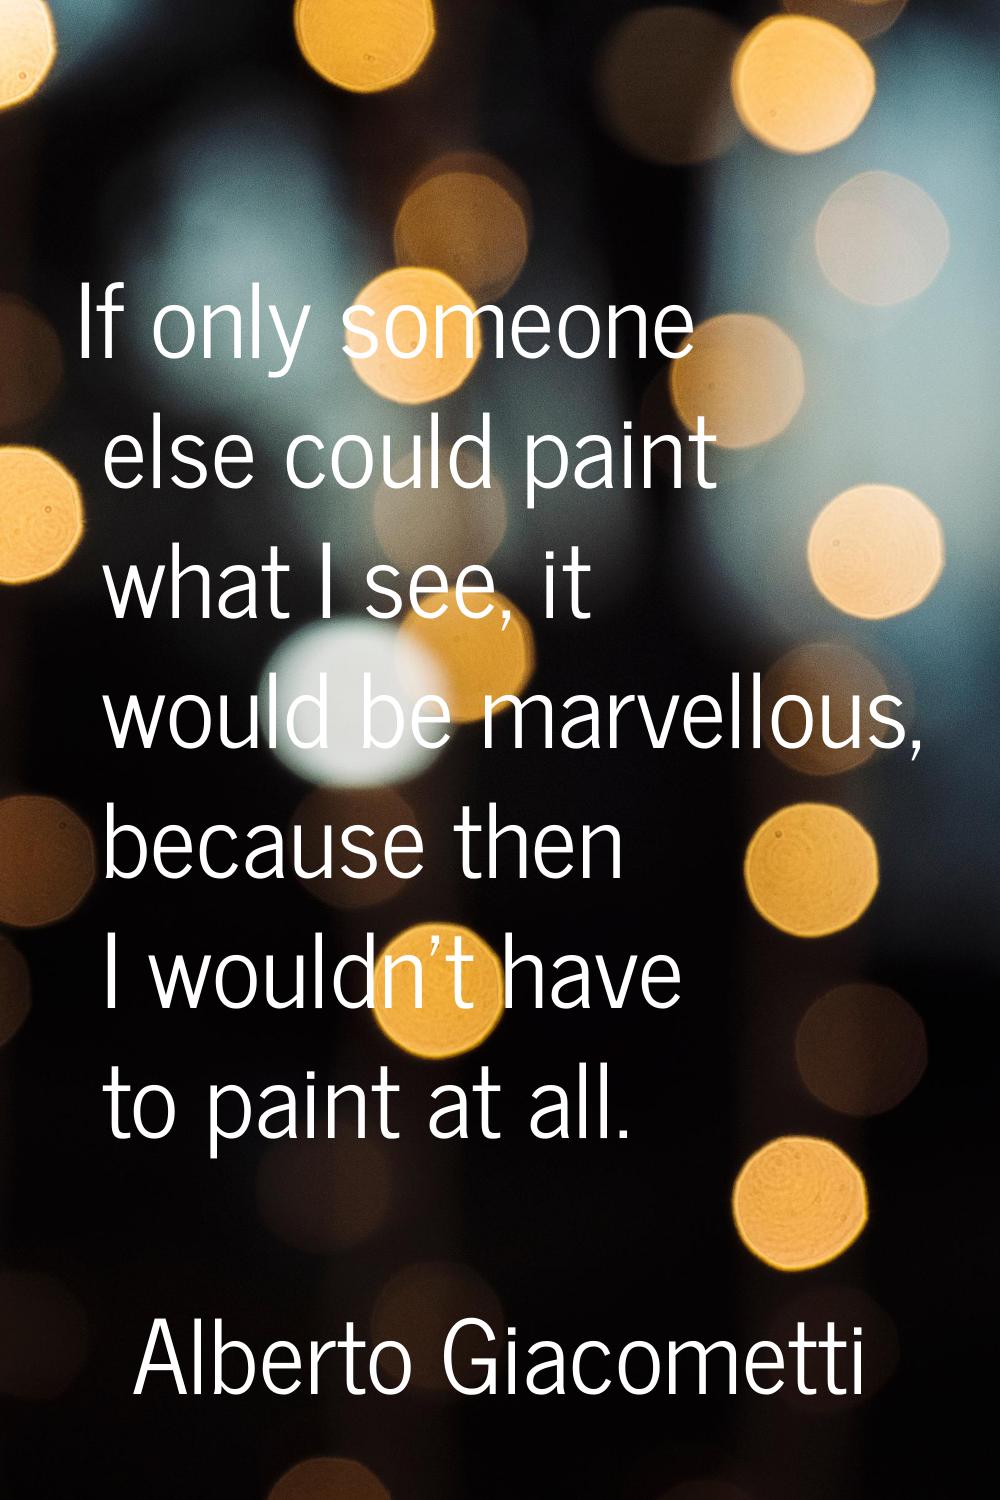 If only someone else could paint what I see, it would be marvellous, because then I wouldn't have t